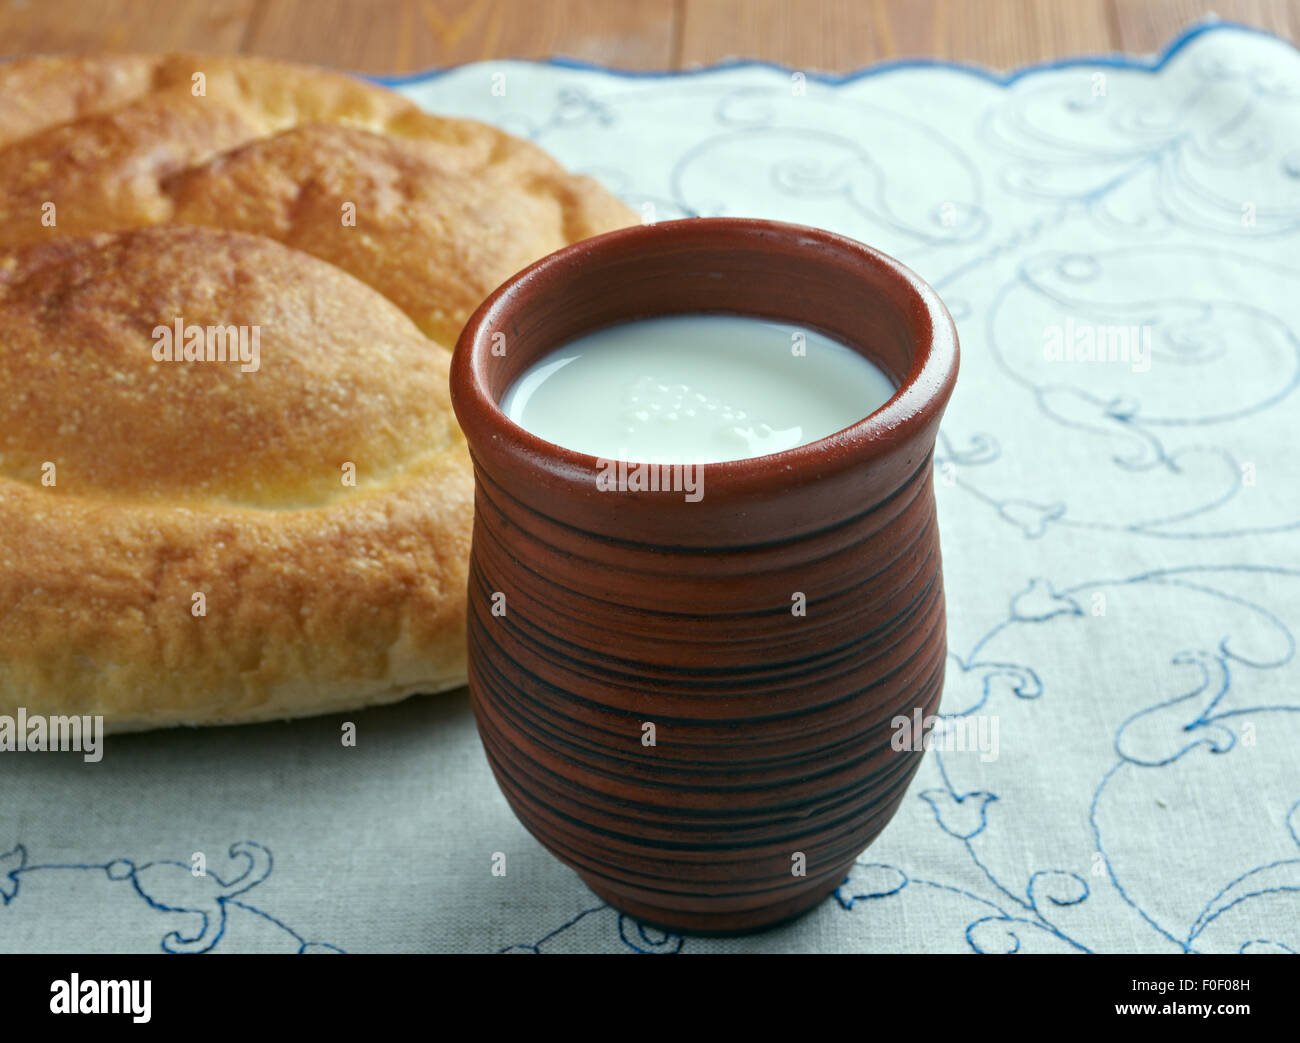 Kaymak creamy dairy product similar to clotted cream.in Central Asia, the Balkans, Turkic regions Stock Photo